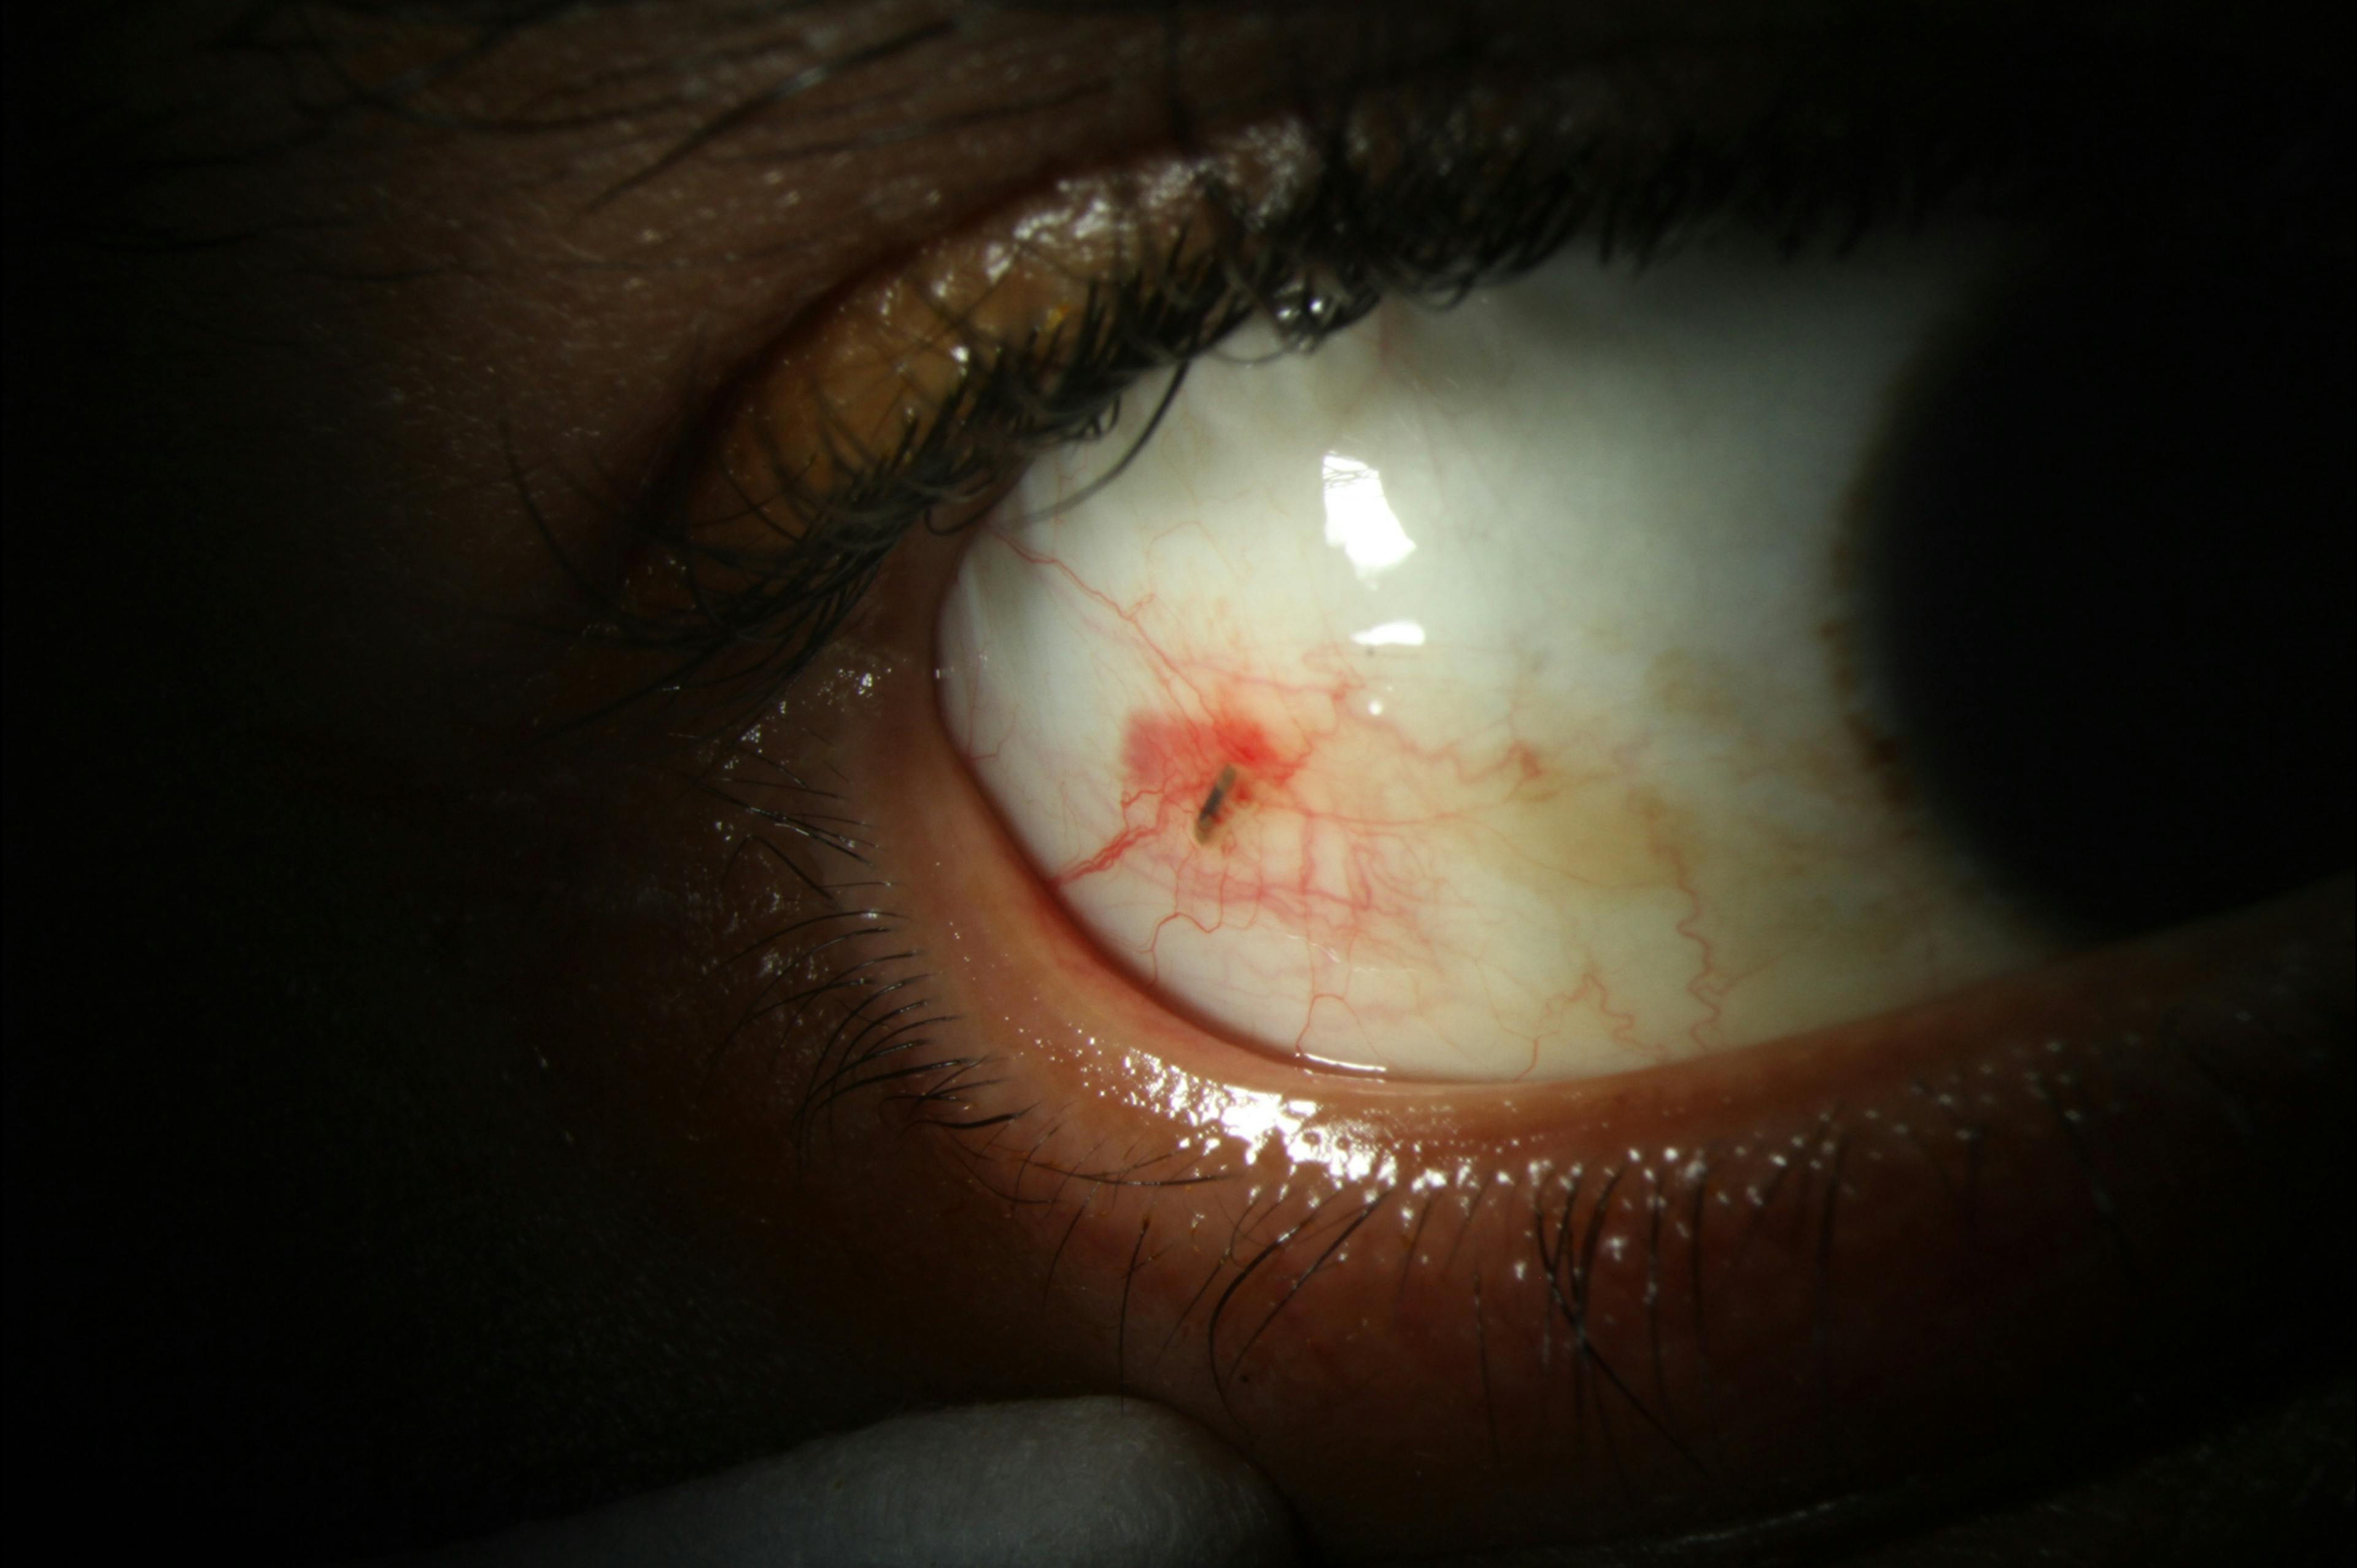 https://covalentcareers3.s3.amazonaws.com/media/original_images/Conjunctival_Foreign_Body_Article.jpg